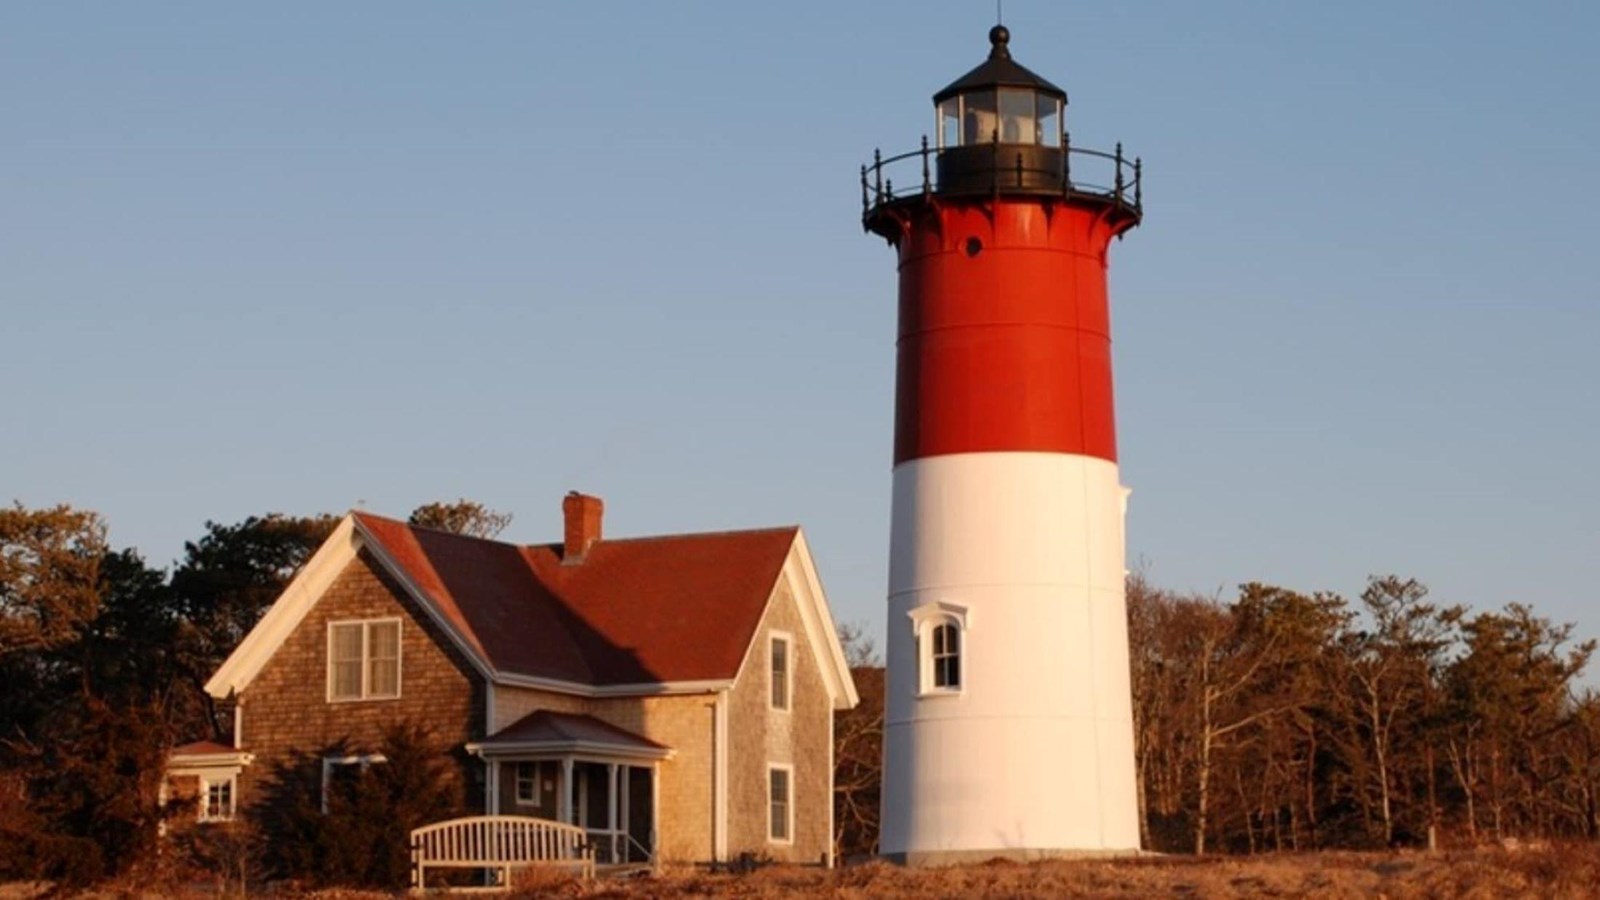 Nauset Light stands half white, half red, with the black light on top. A house stands adjacent.